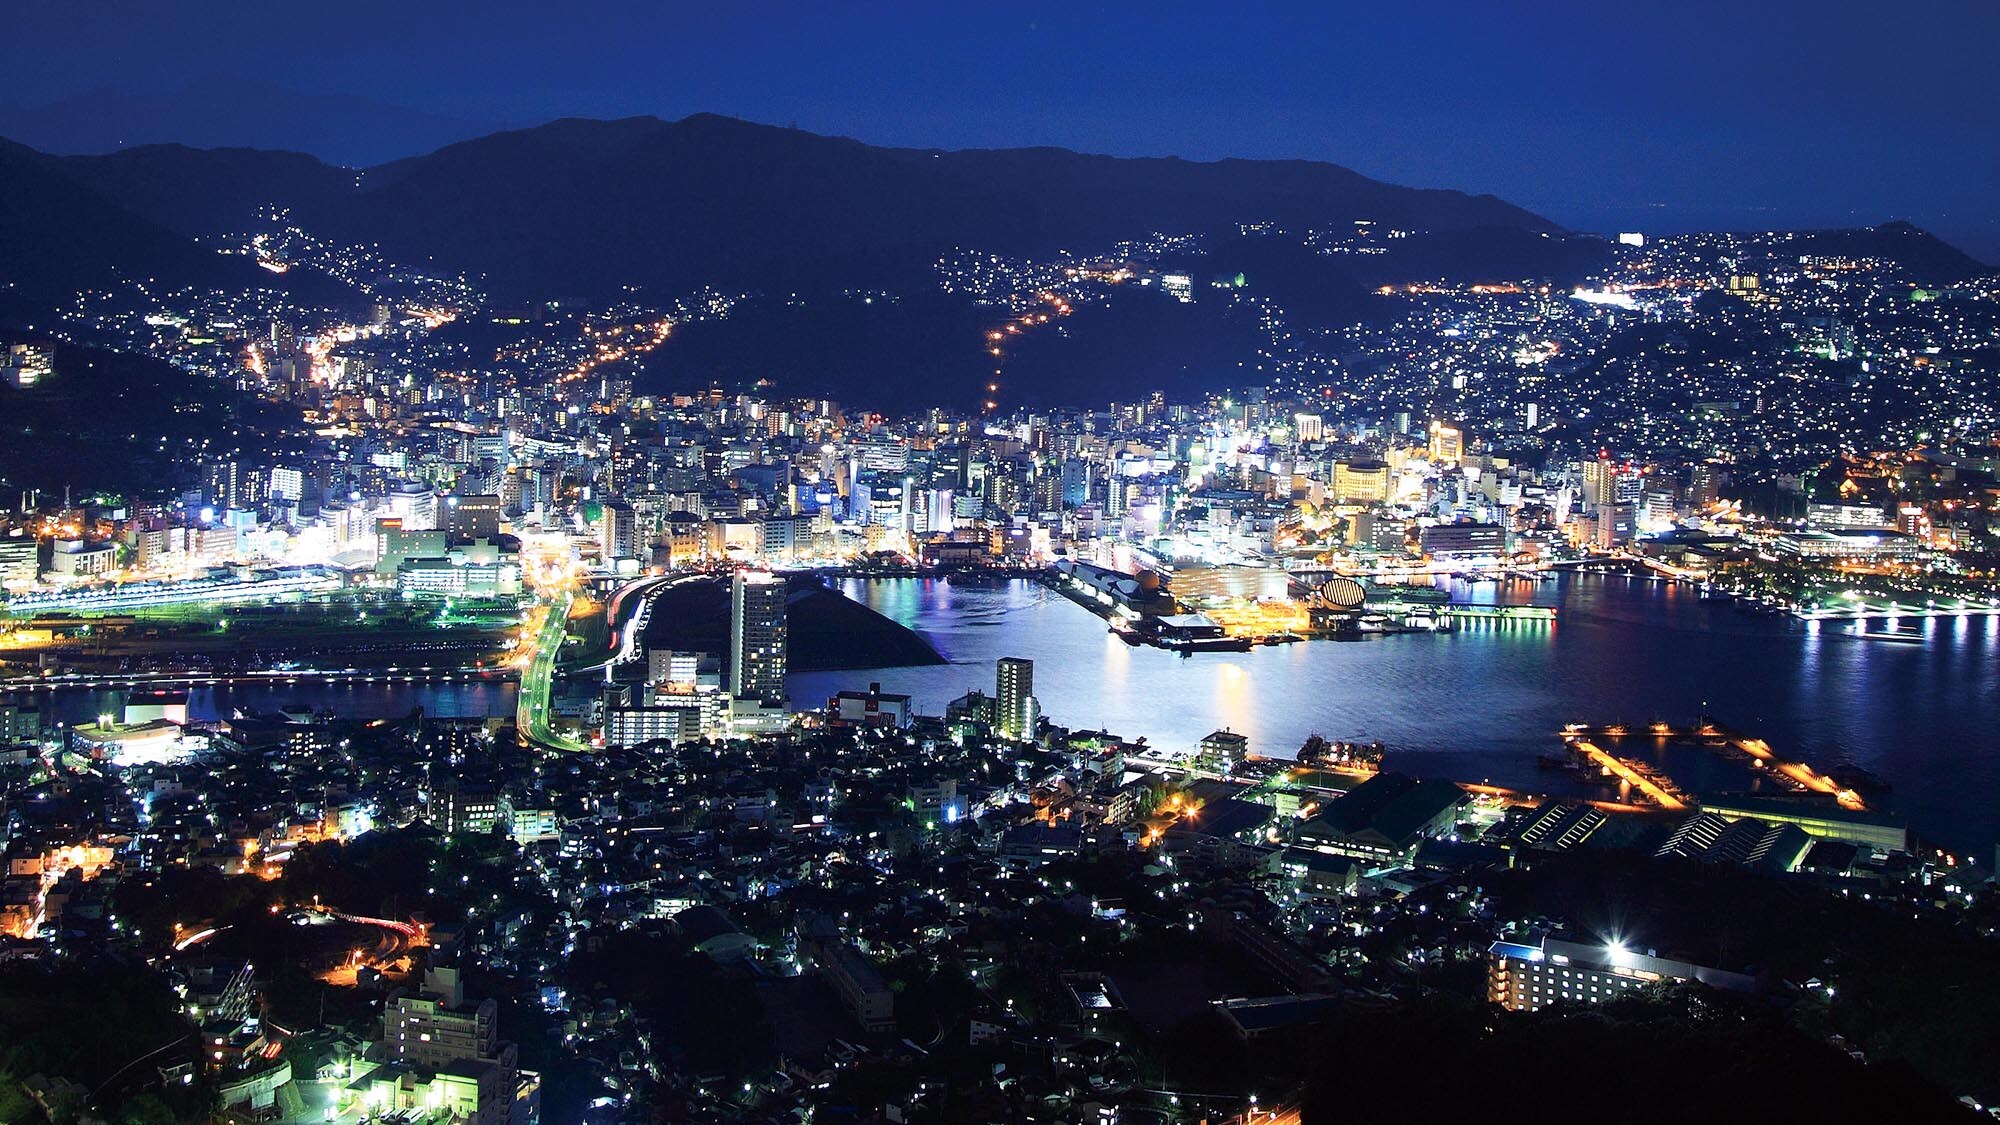 ◆ Night view from Mt. Inasa